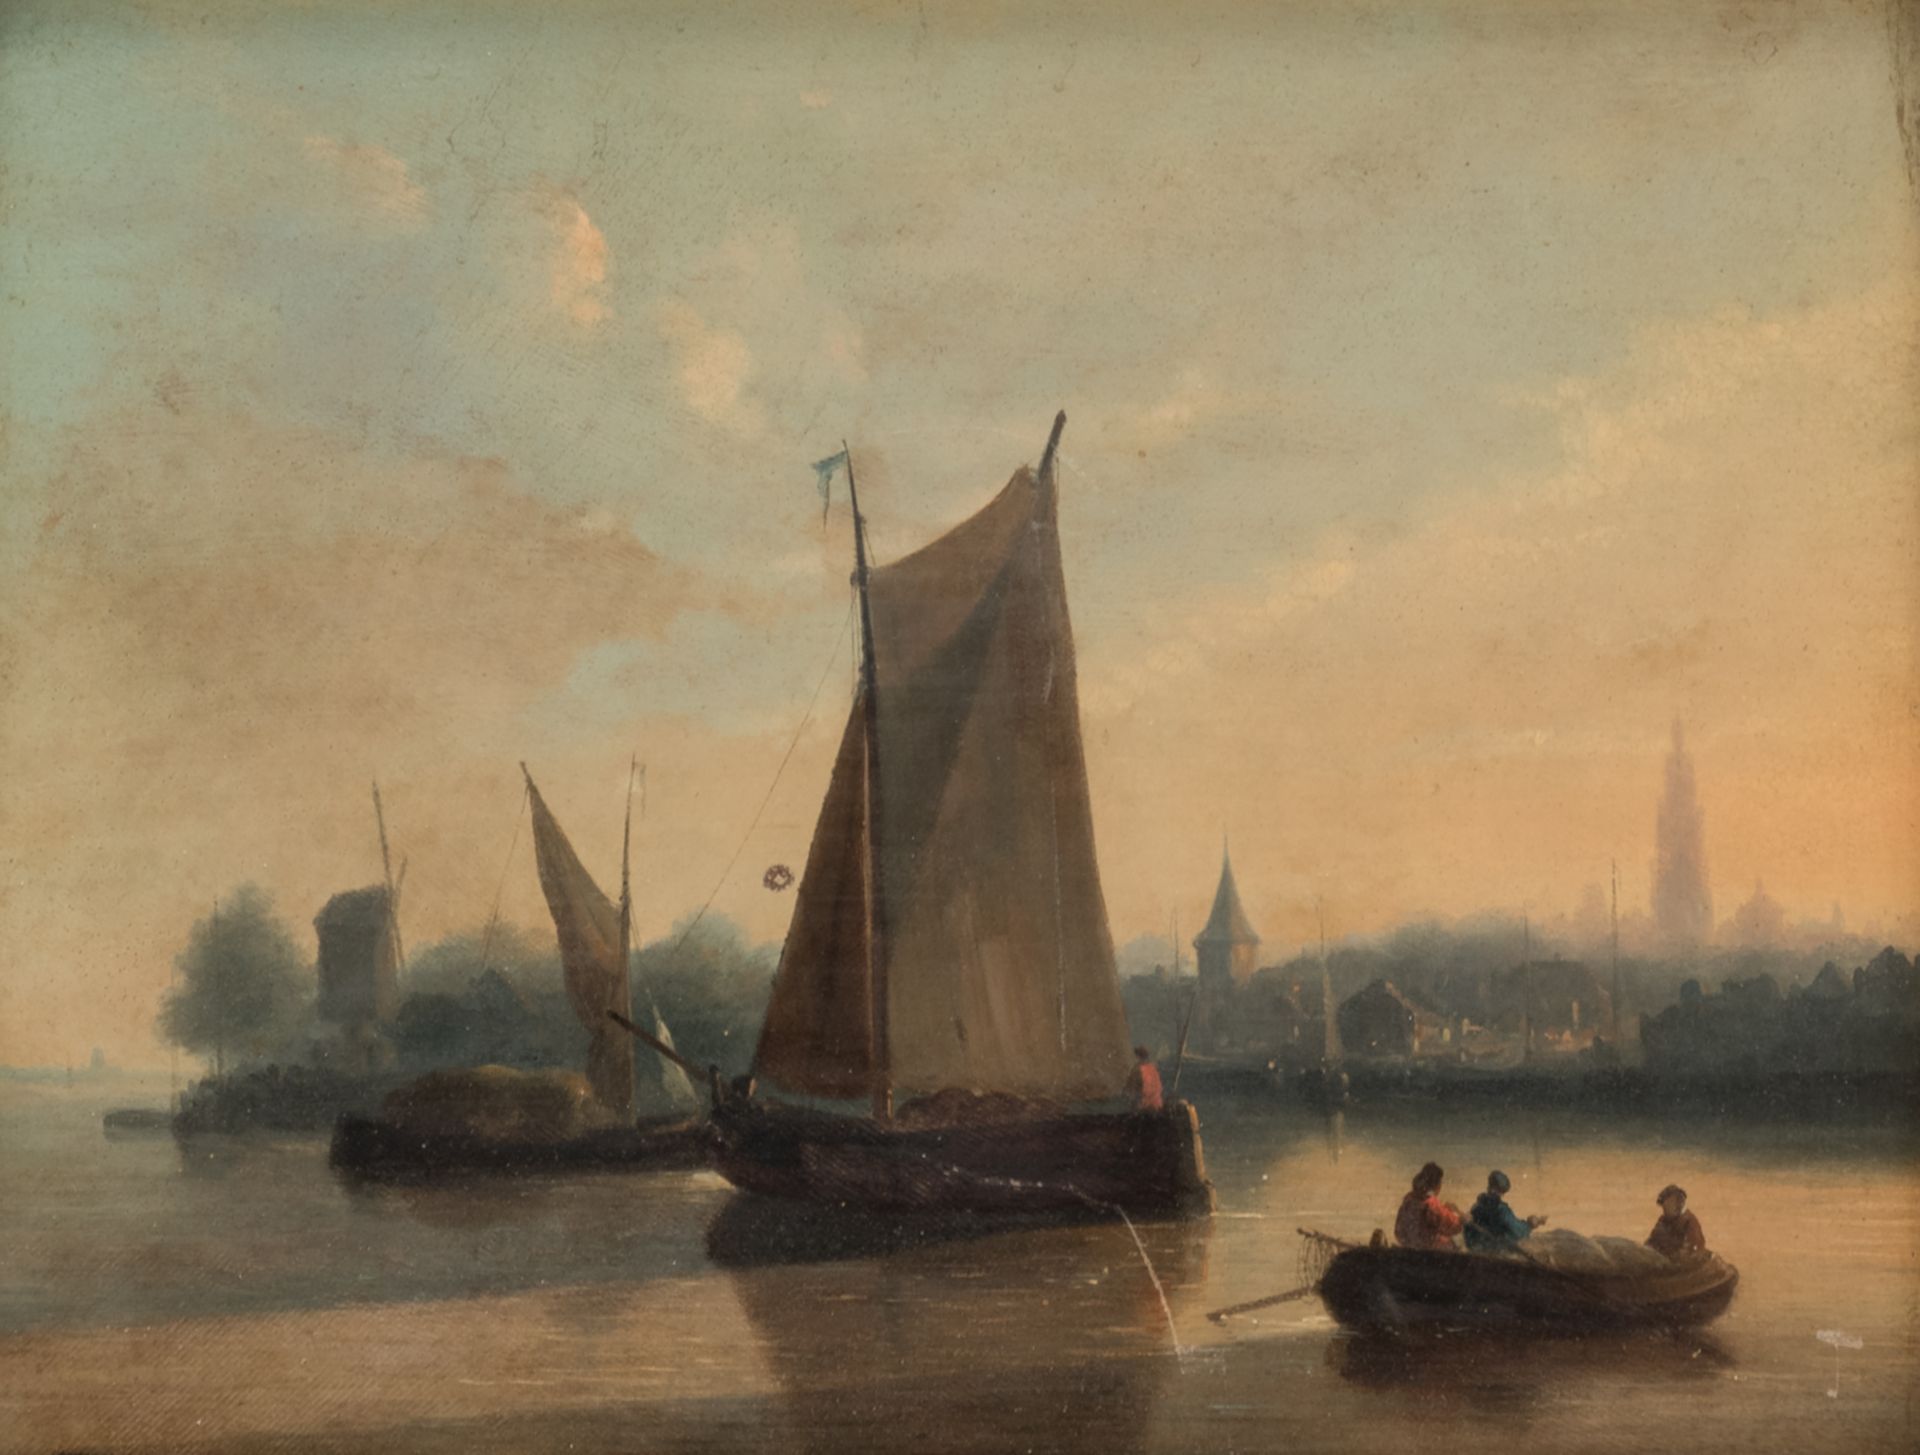 Monogrammed E. W., a harbour view, after Edward William Cooke, dated (18)65?, oil on panel, 27,5 x 3